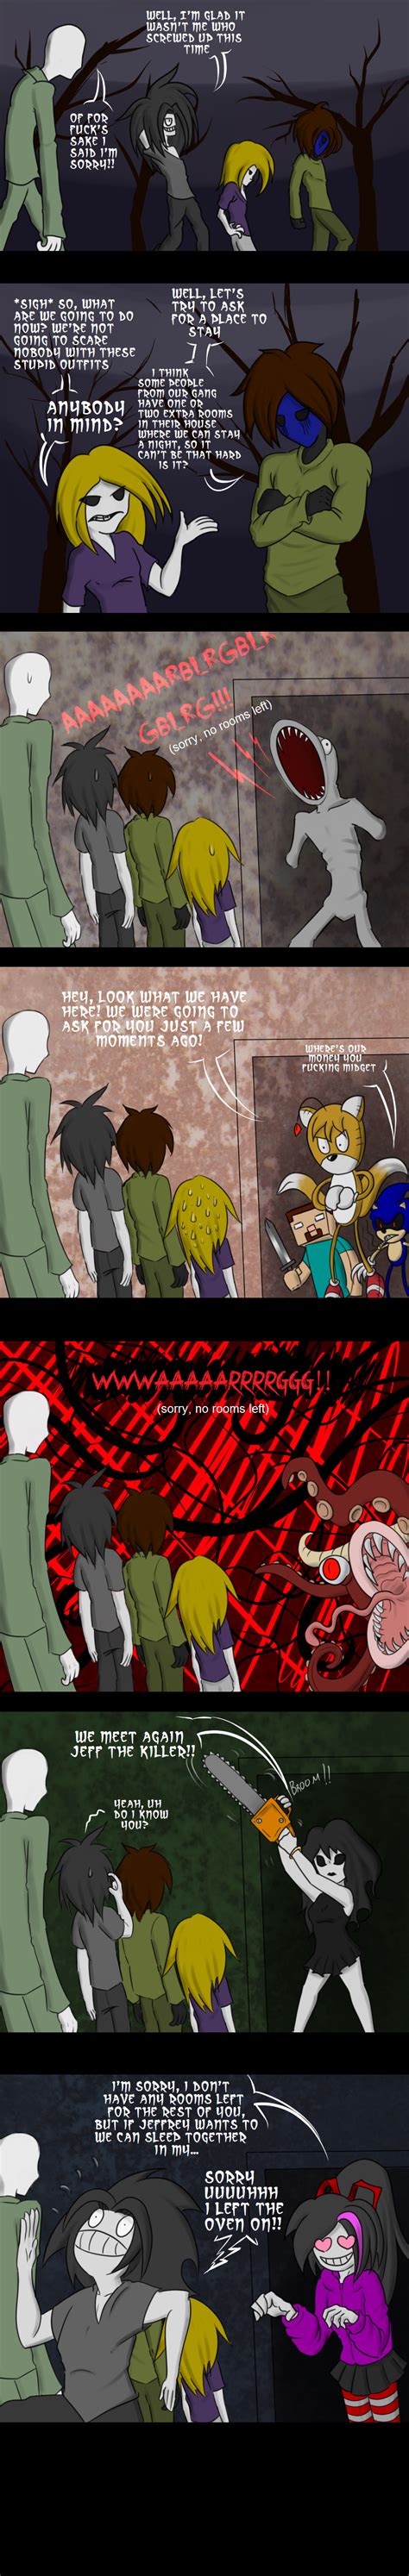 Creepypasta Friends Vs The Scp Foundation Page 6 By Anipartom On